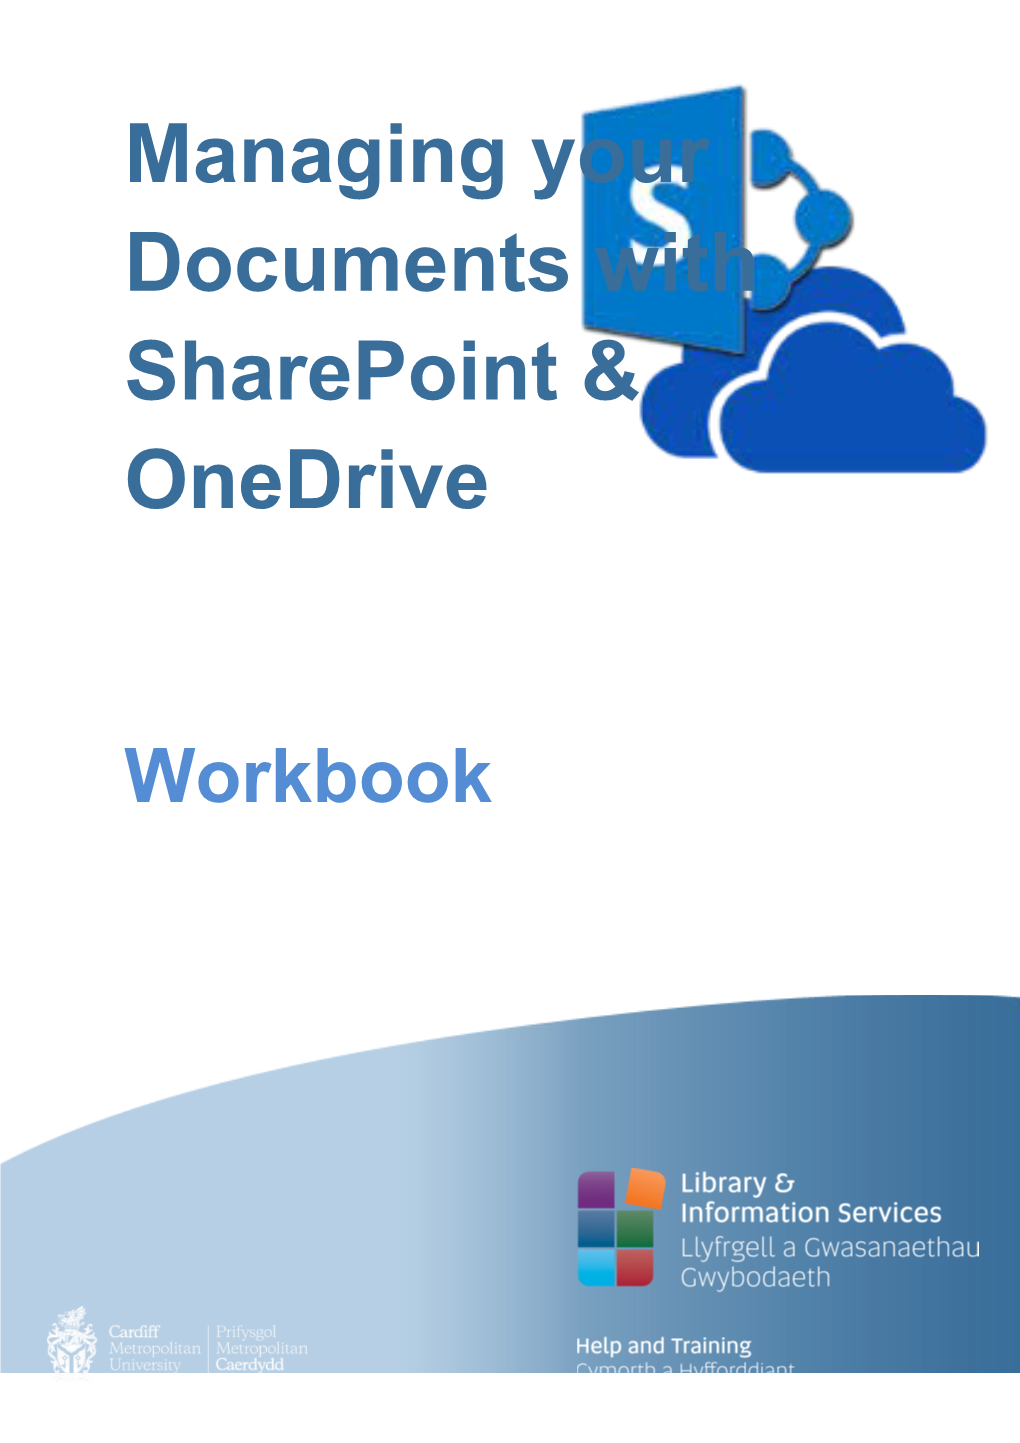 Managing Your Documents with Sharepoint & Onedrive Workbook